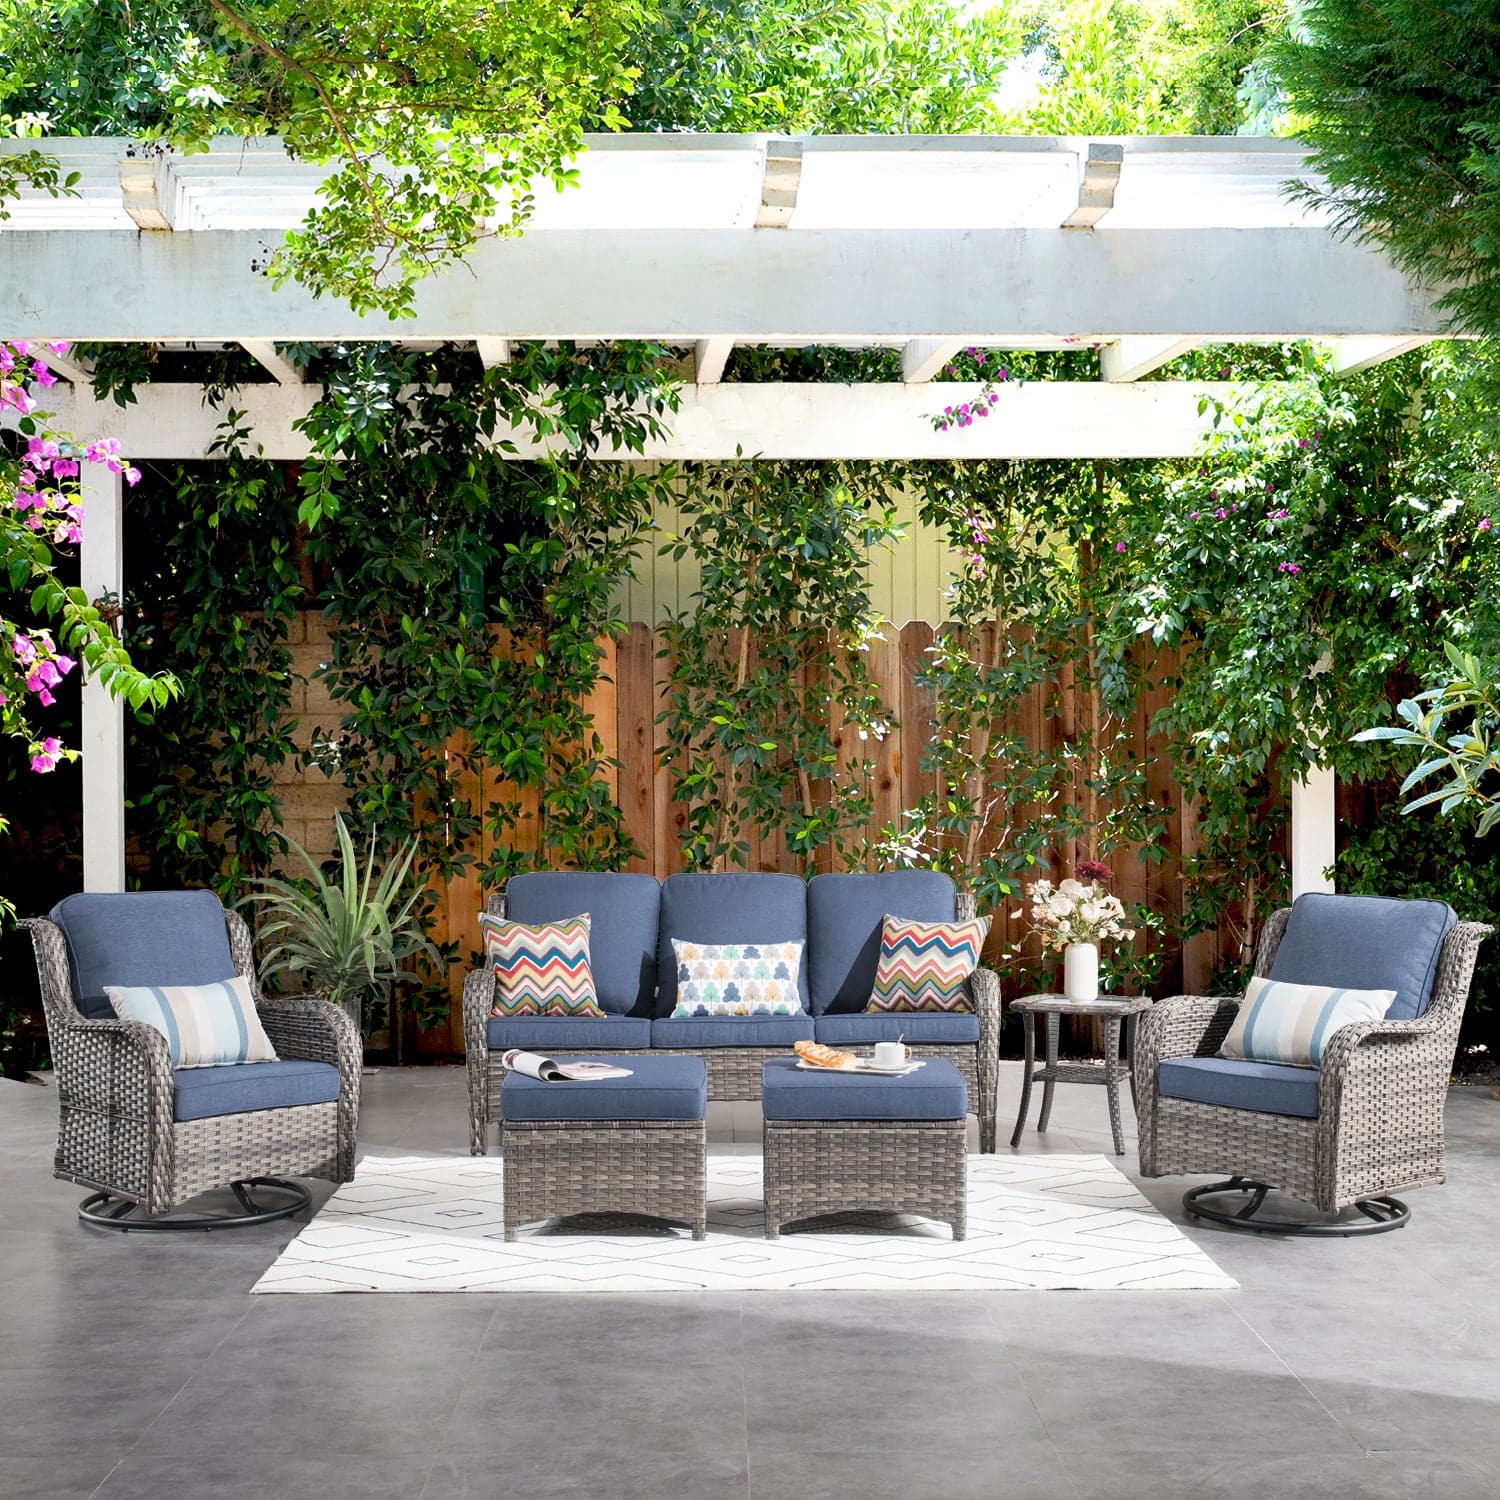 How Much Does the Average Patio Set Cost